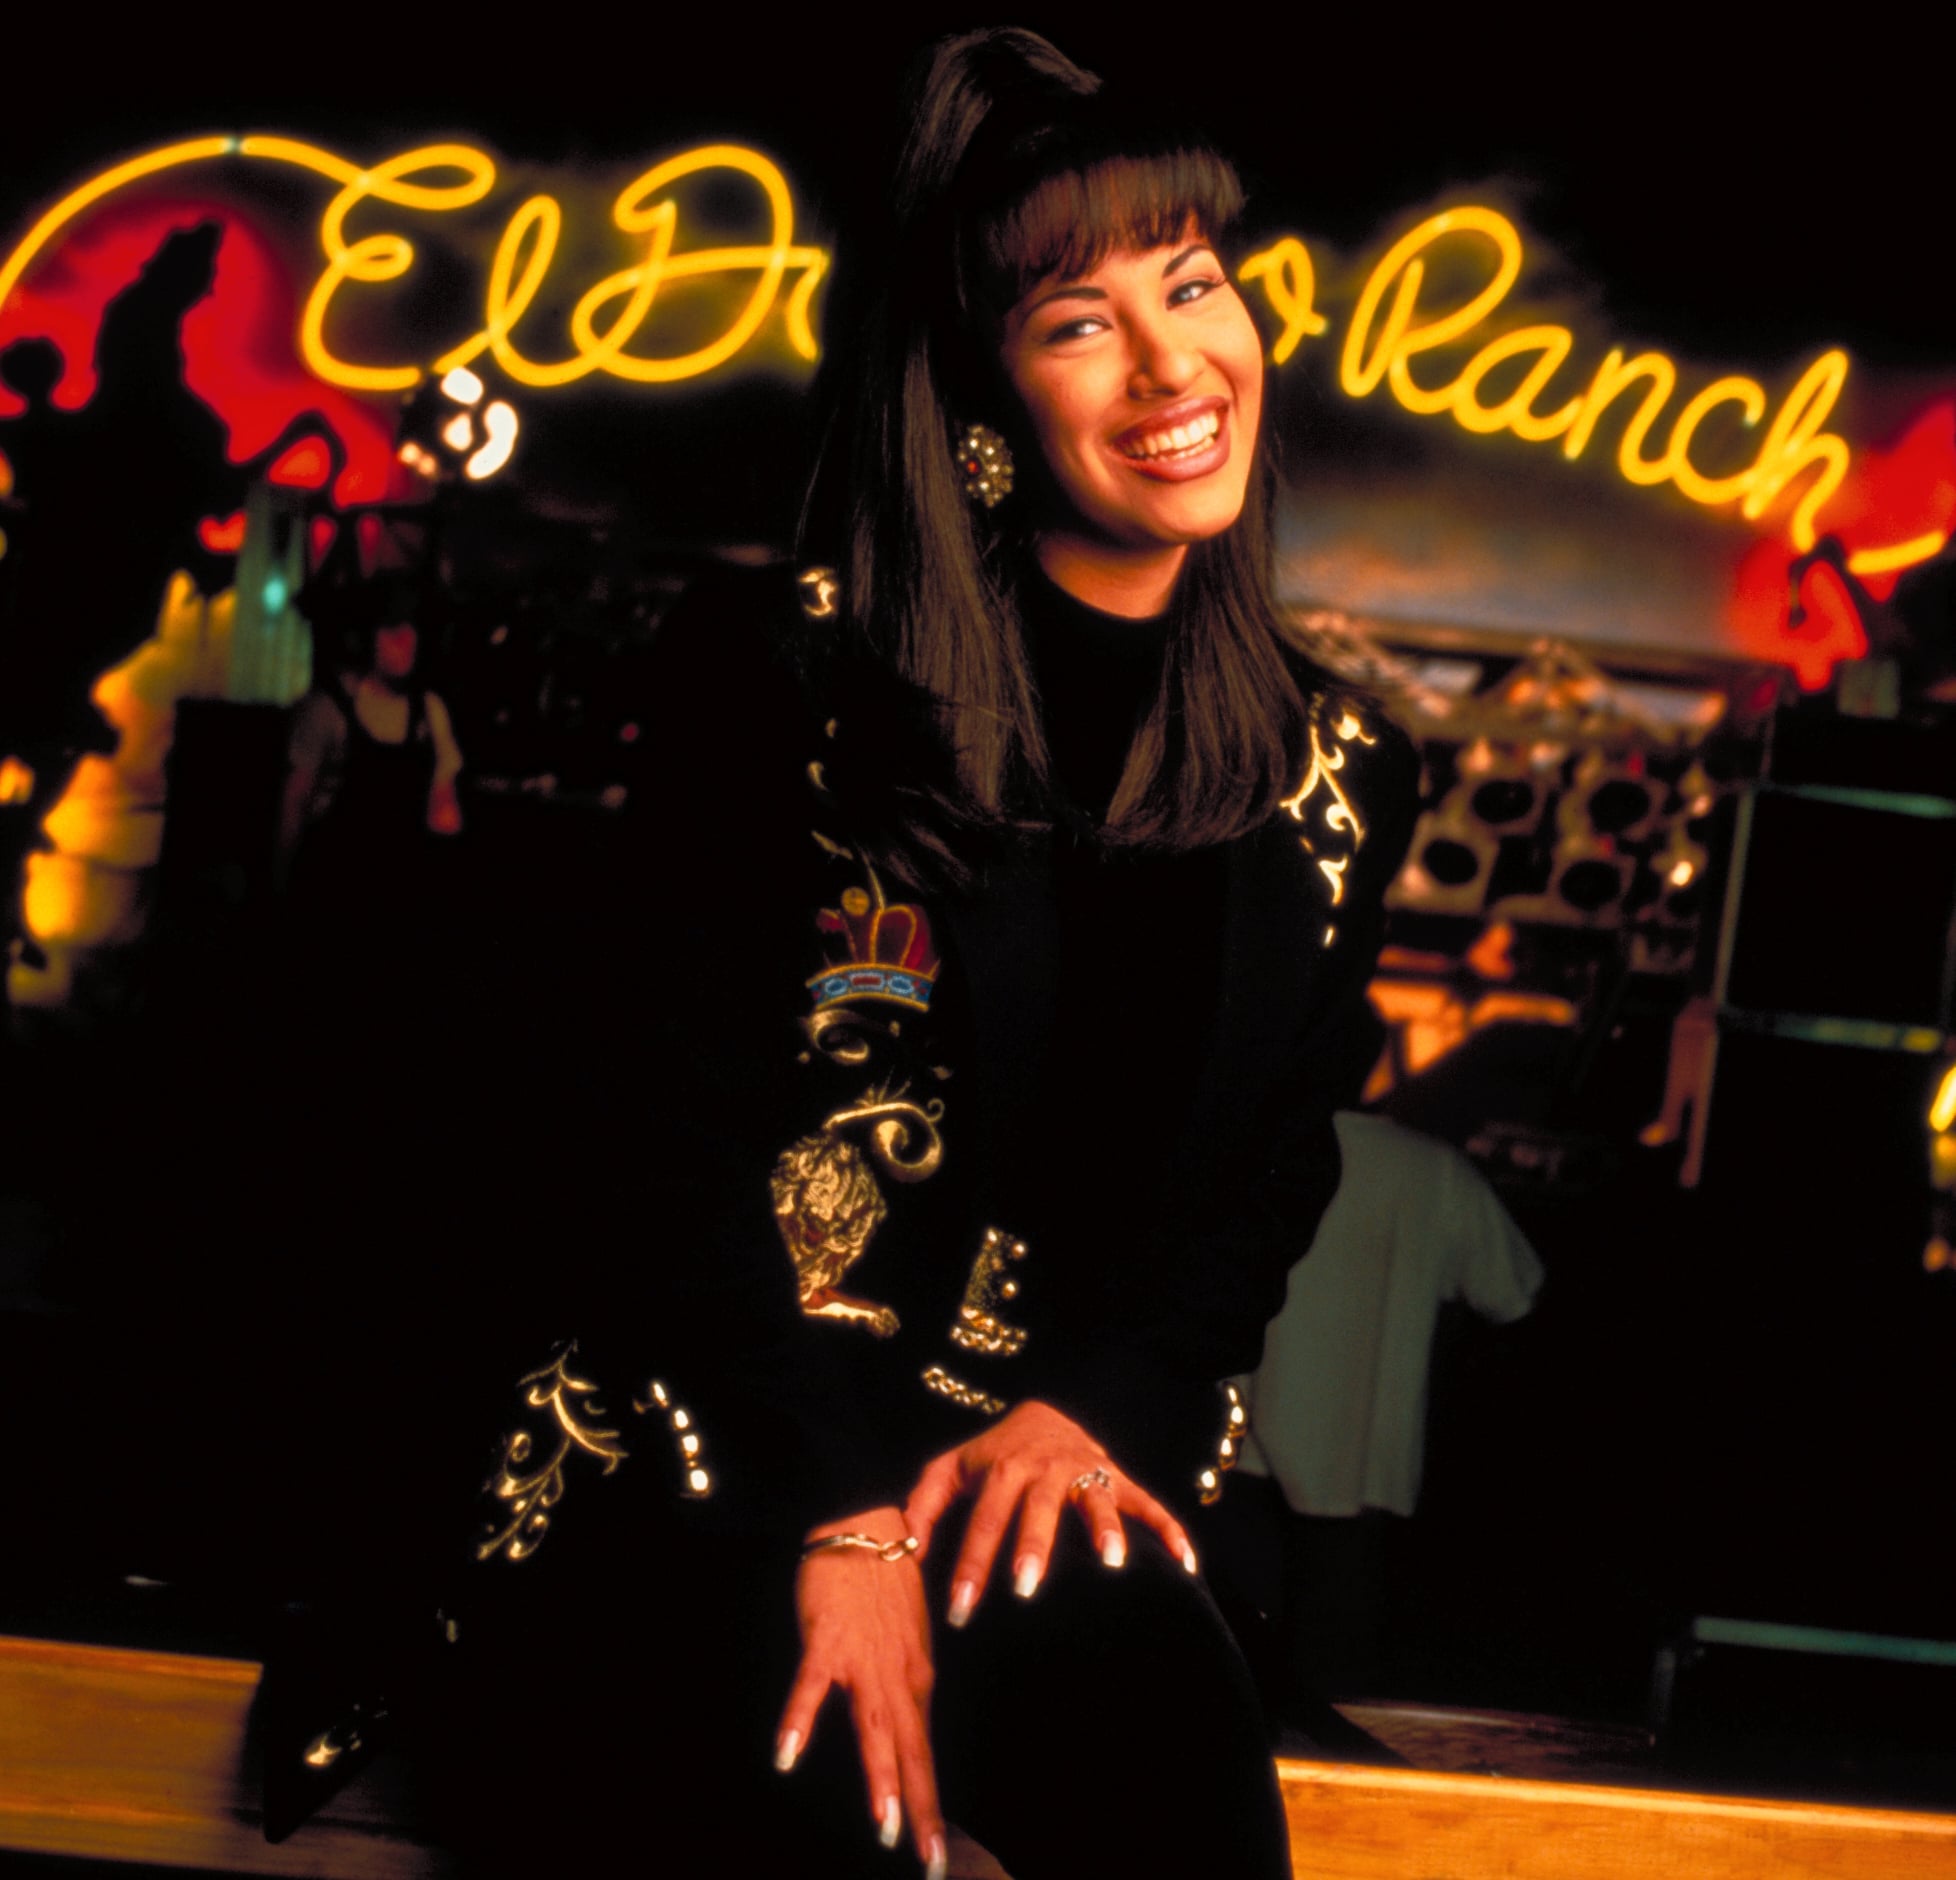 Singer Selena Quintanilla Perez inside nightclub (no caps).  (Photo by Pam Francis/The LIFE Images Collection via Getty Images/Getty Images)